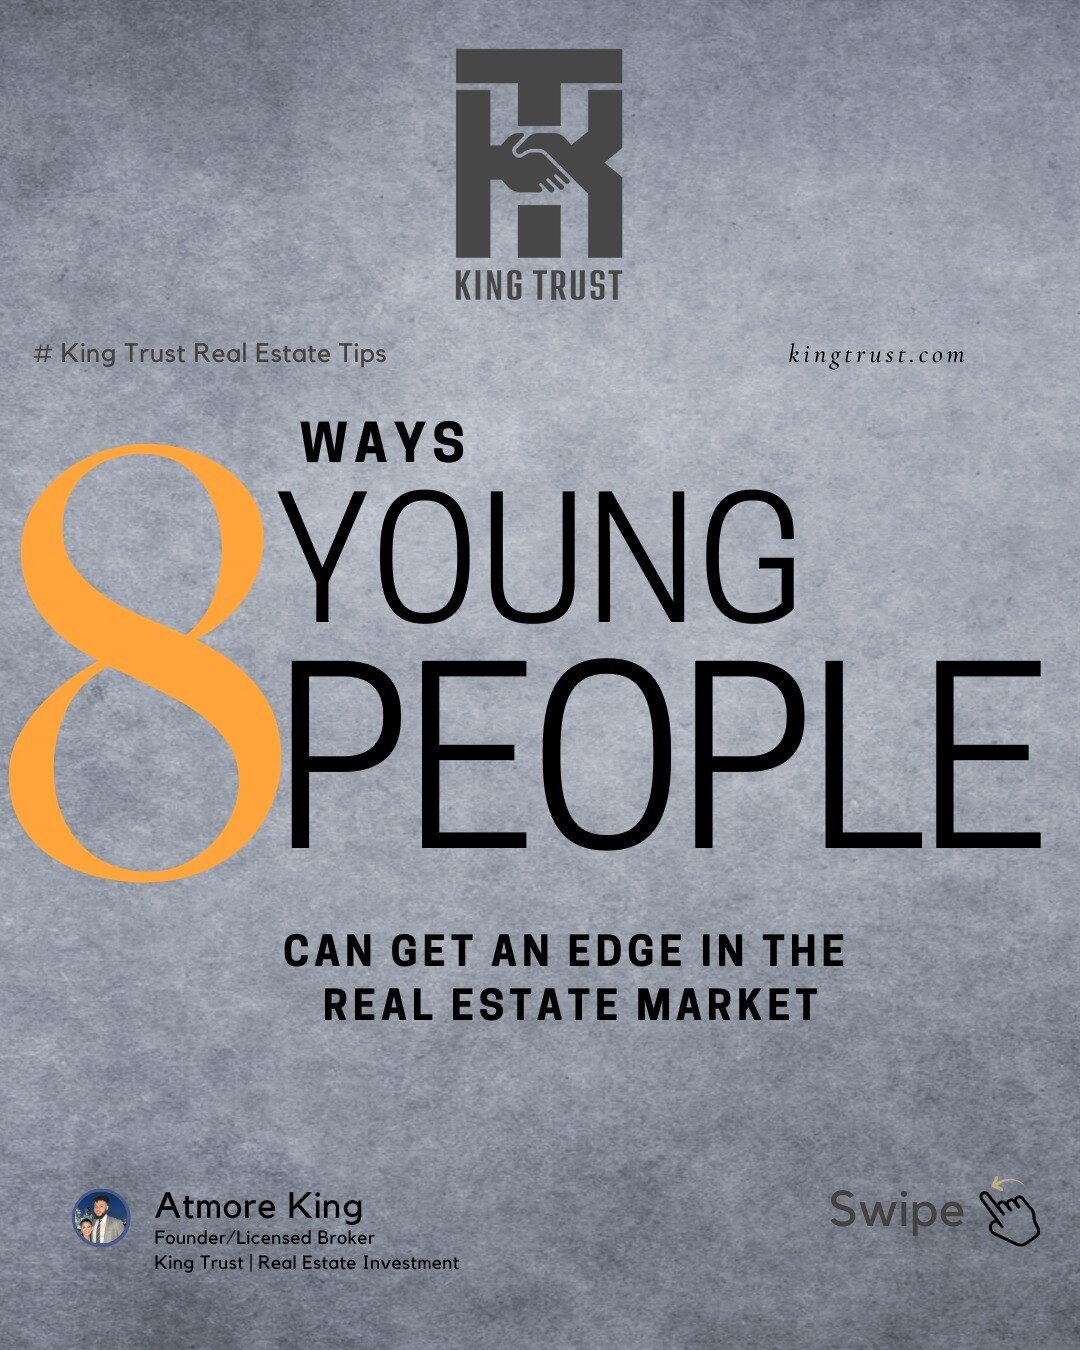 Yes millennial can get an edge in the real estate market here are the ways to get it!

A great way to generate cashflow has always been through property investing. Learn how millennials are buying their first properties!

You also don&rsquo;t have to